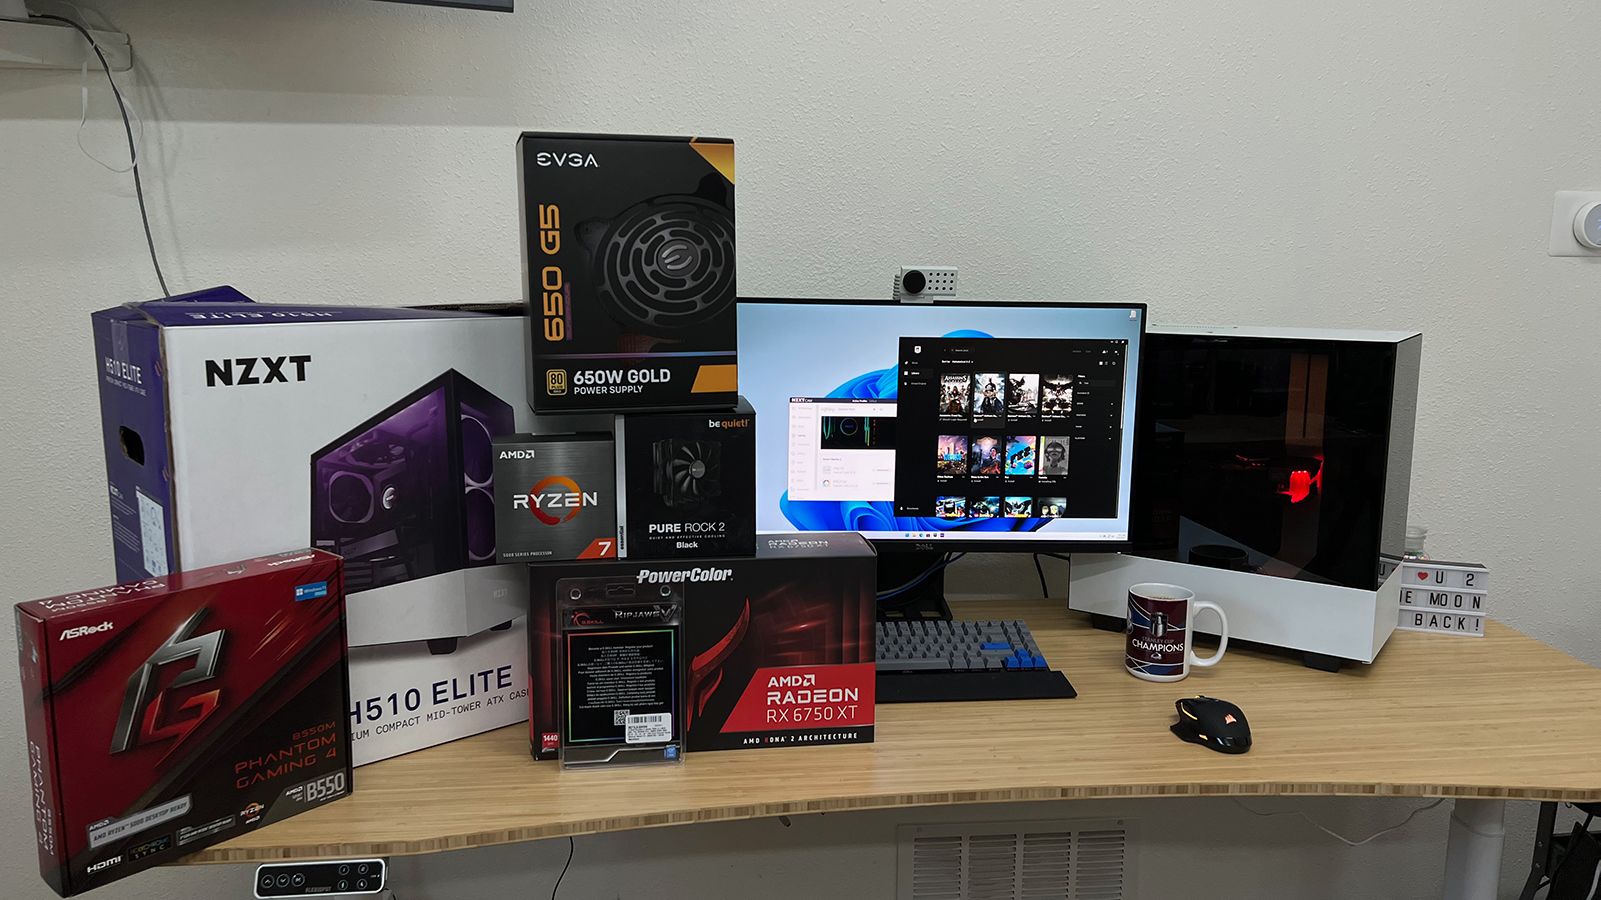 How to Build a Pro Gaming PC - 10 Gaming Setup Ideas